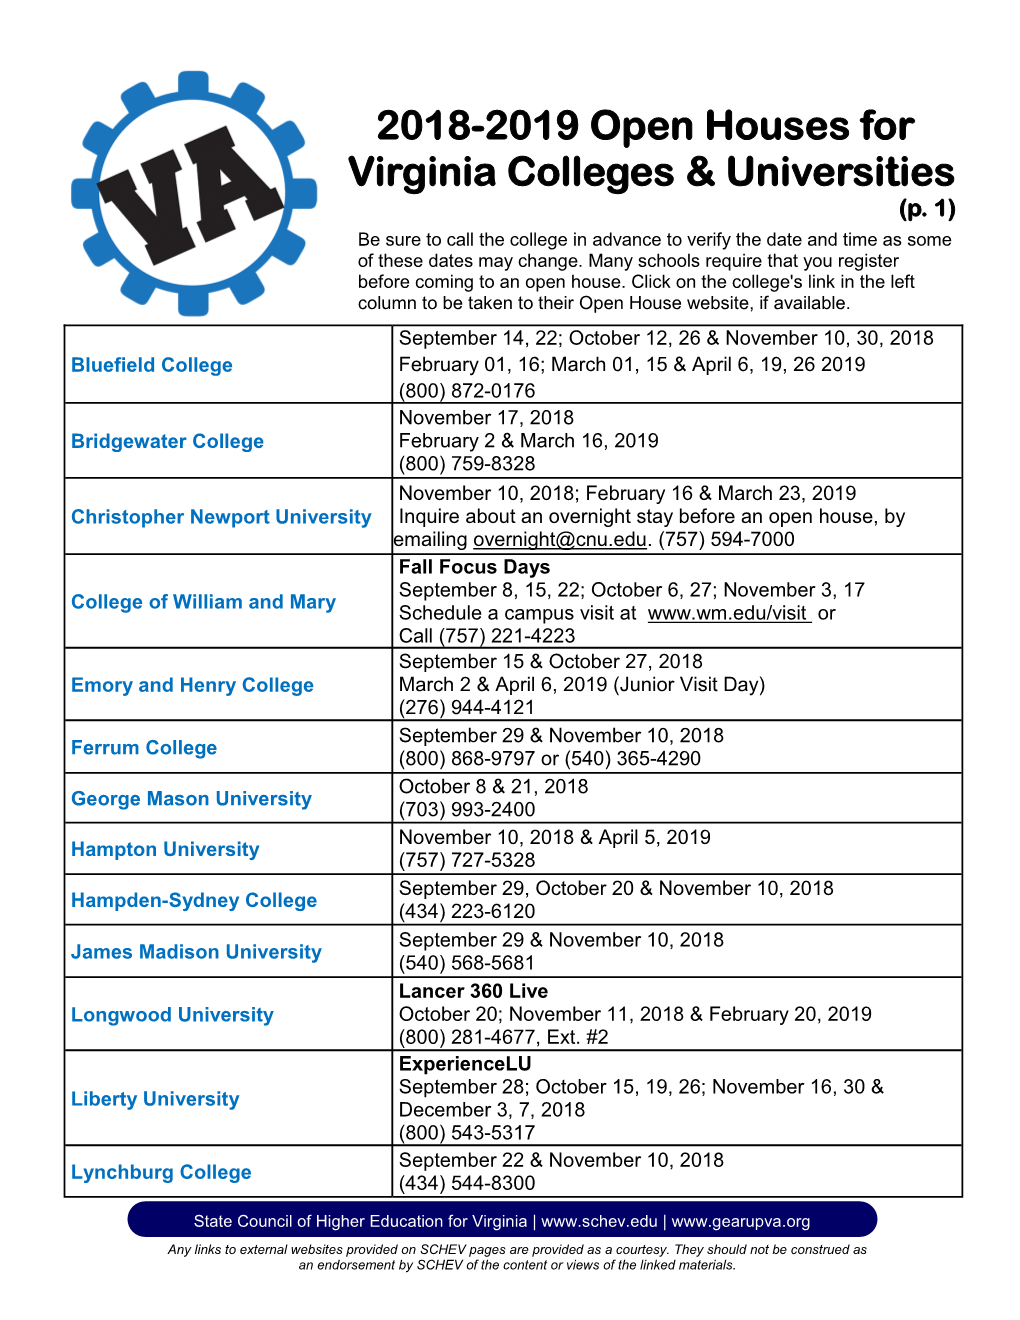 2018-2019 Open Houses for Virginia Colleges & Universities